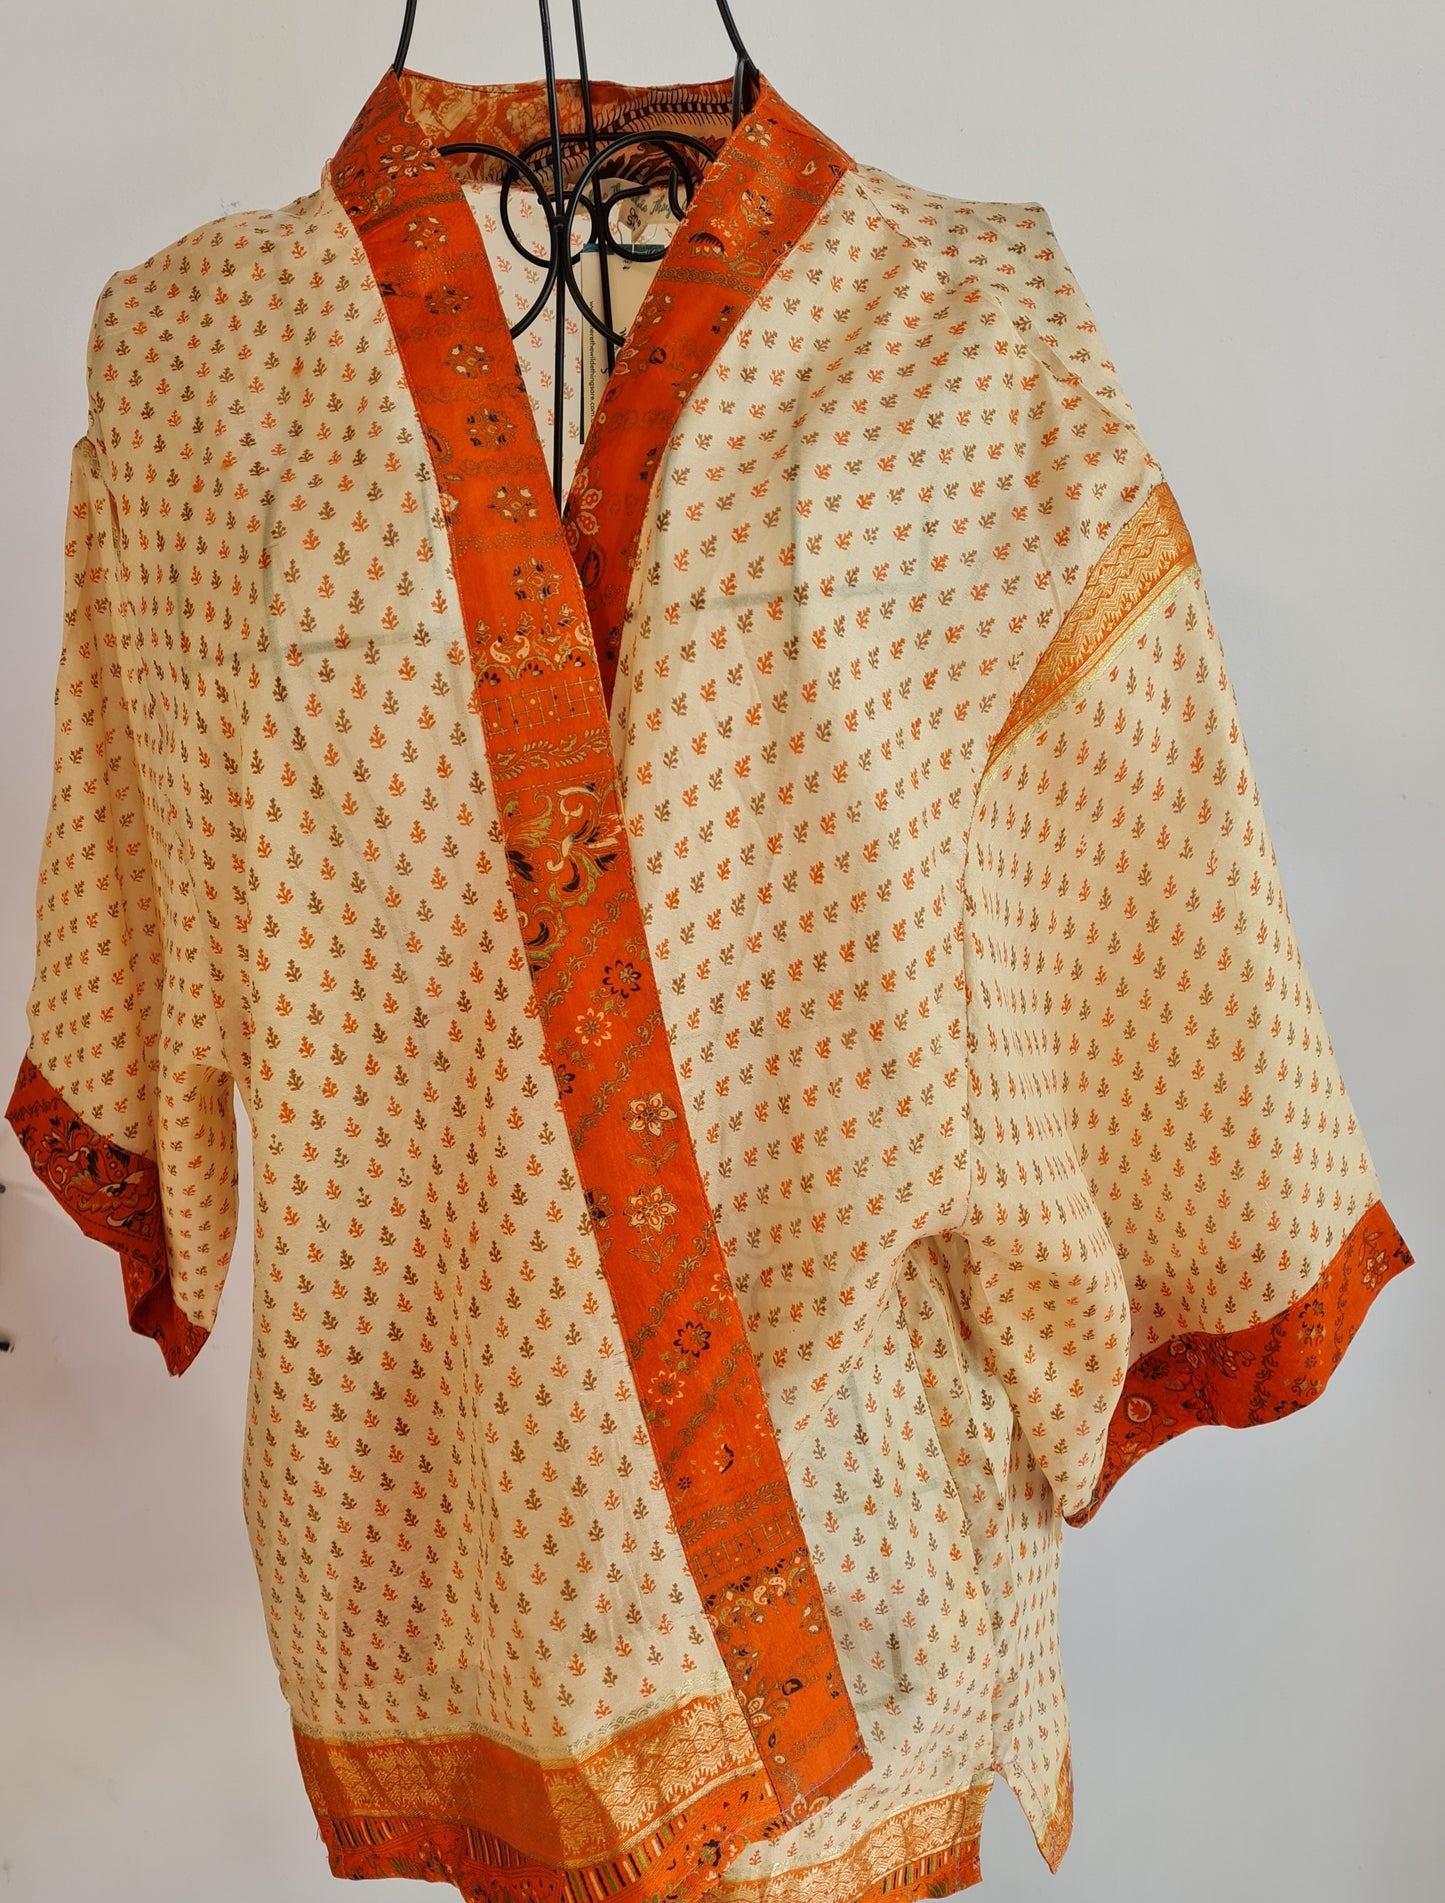 Mandarin Palace a very pale yellow muse jacket crossed over a wire mannequin. it features a very simple orange and brown leaf pattern cover the whole thing. a deep vibrant orange trims every edge of the jacket with black and gold accents.